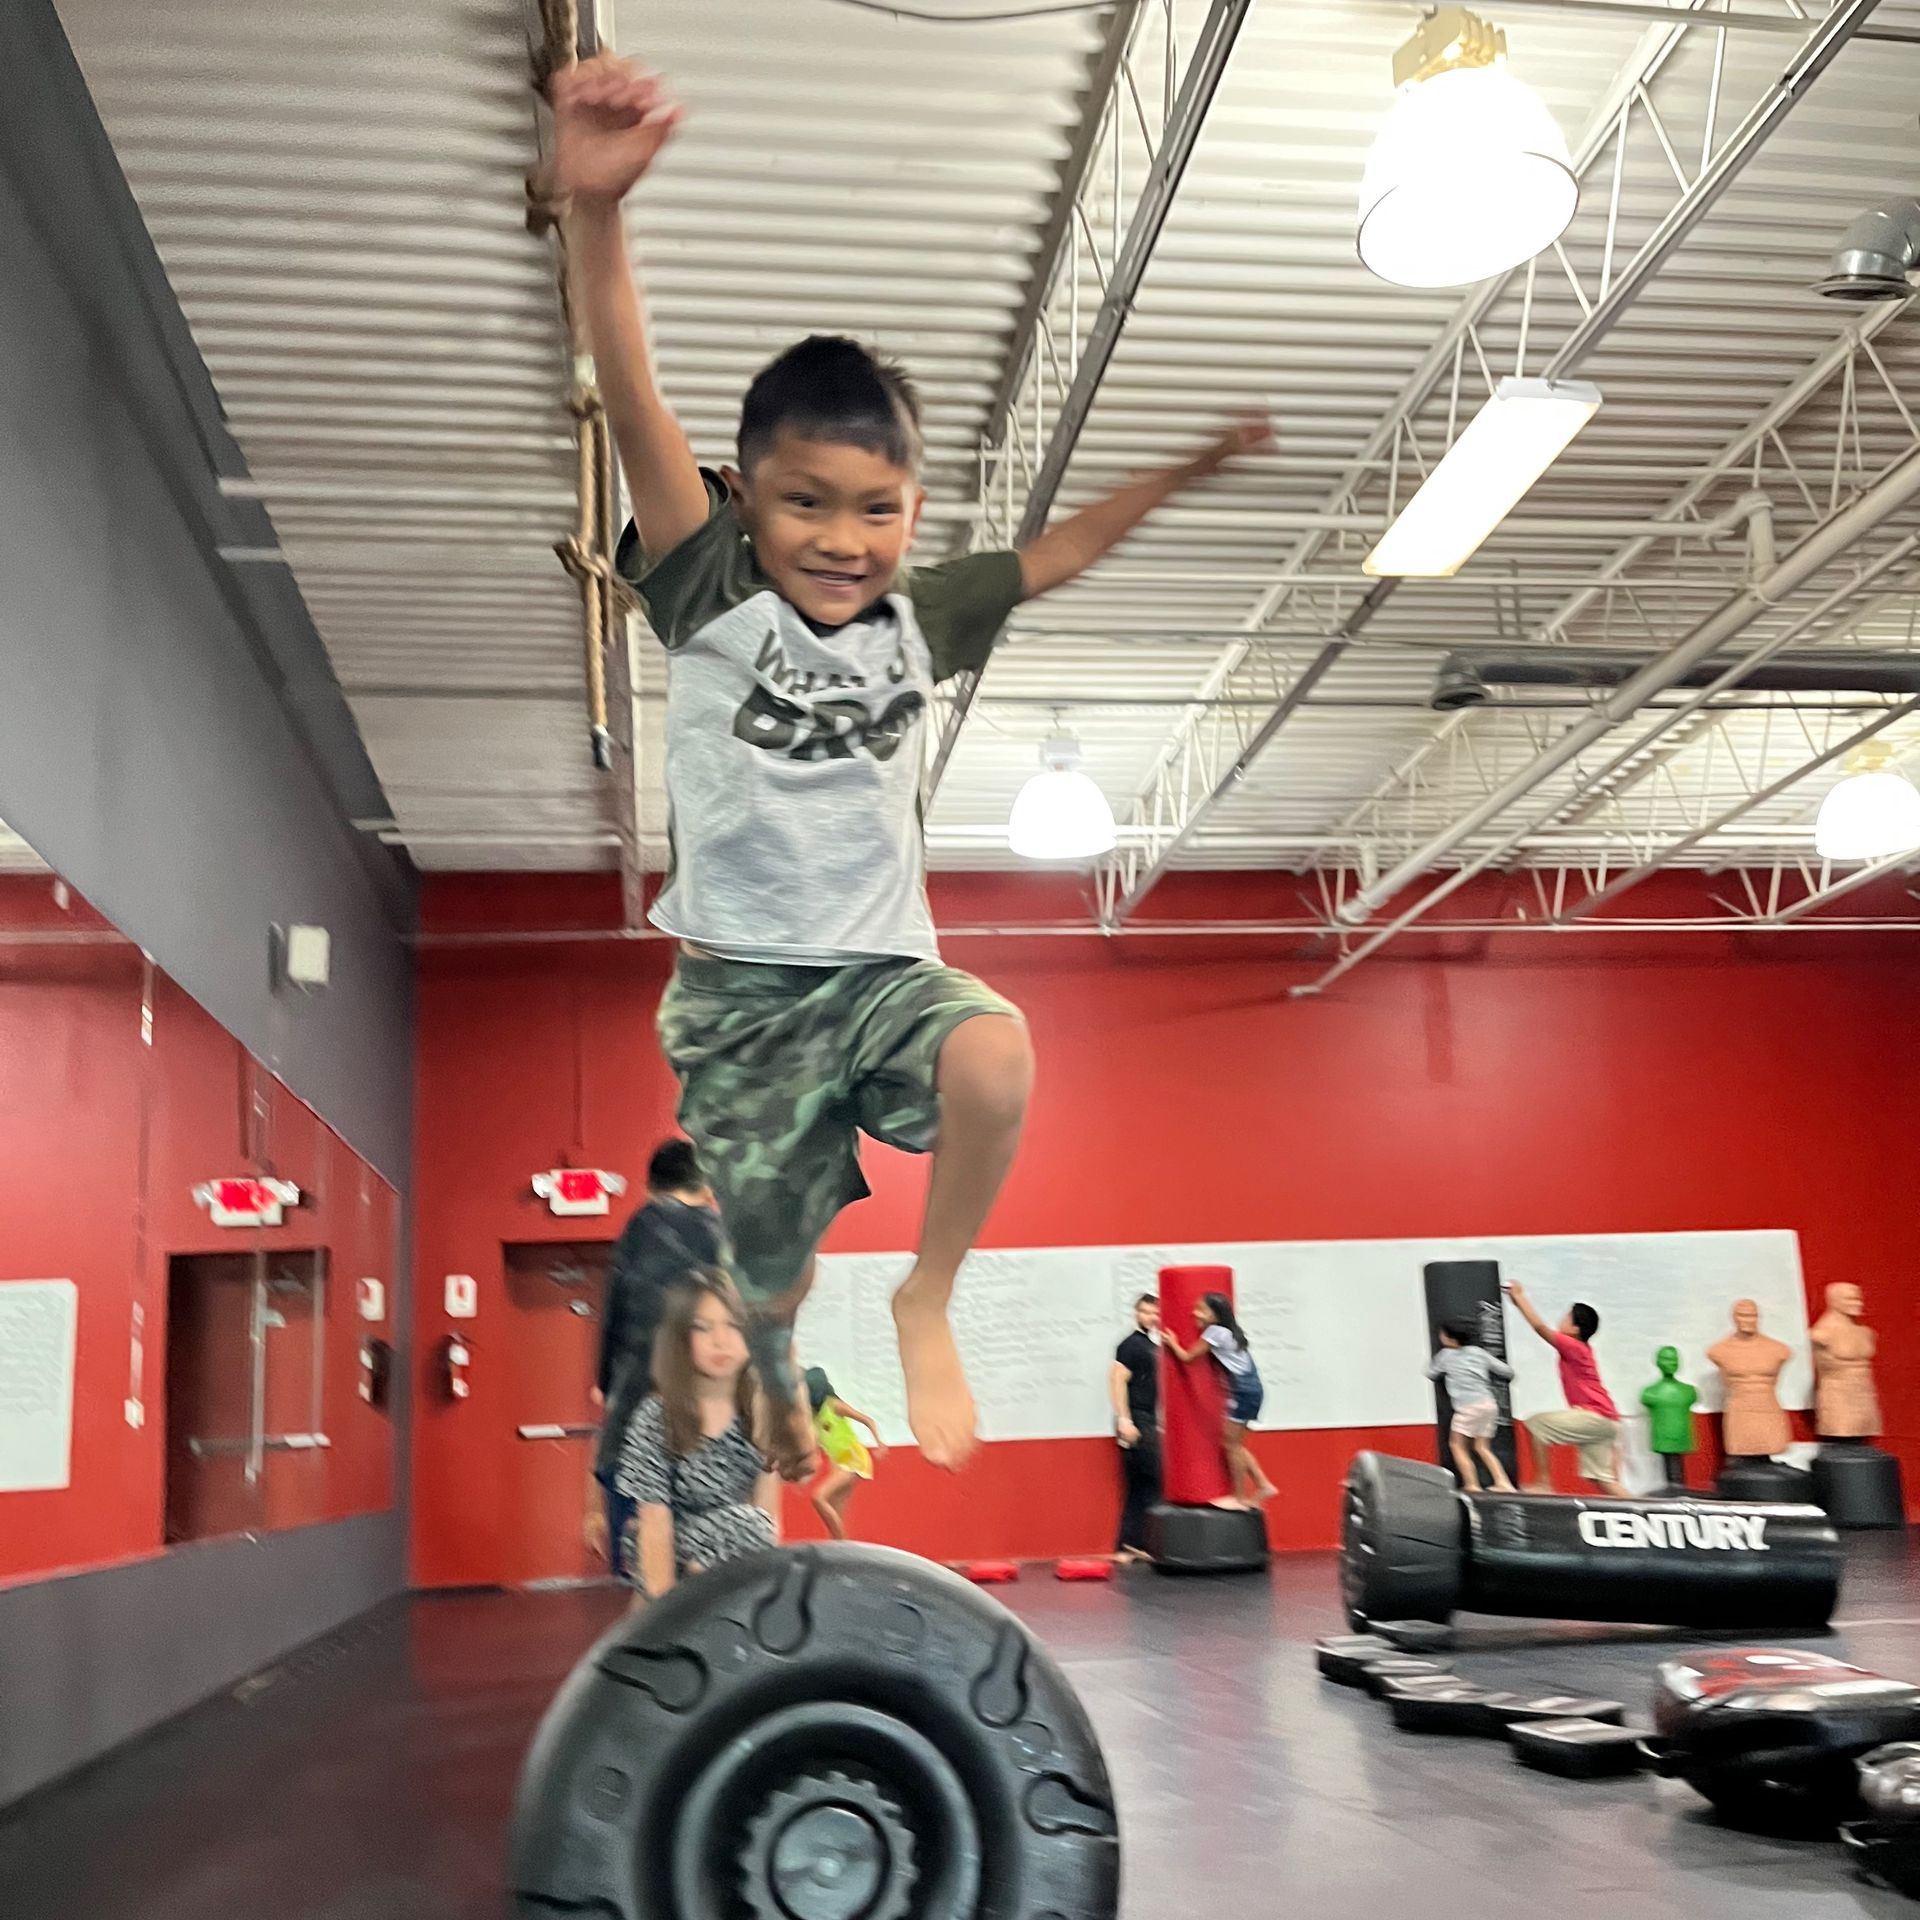 a young boy is standing on a tire in a gym .